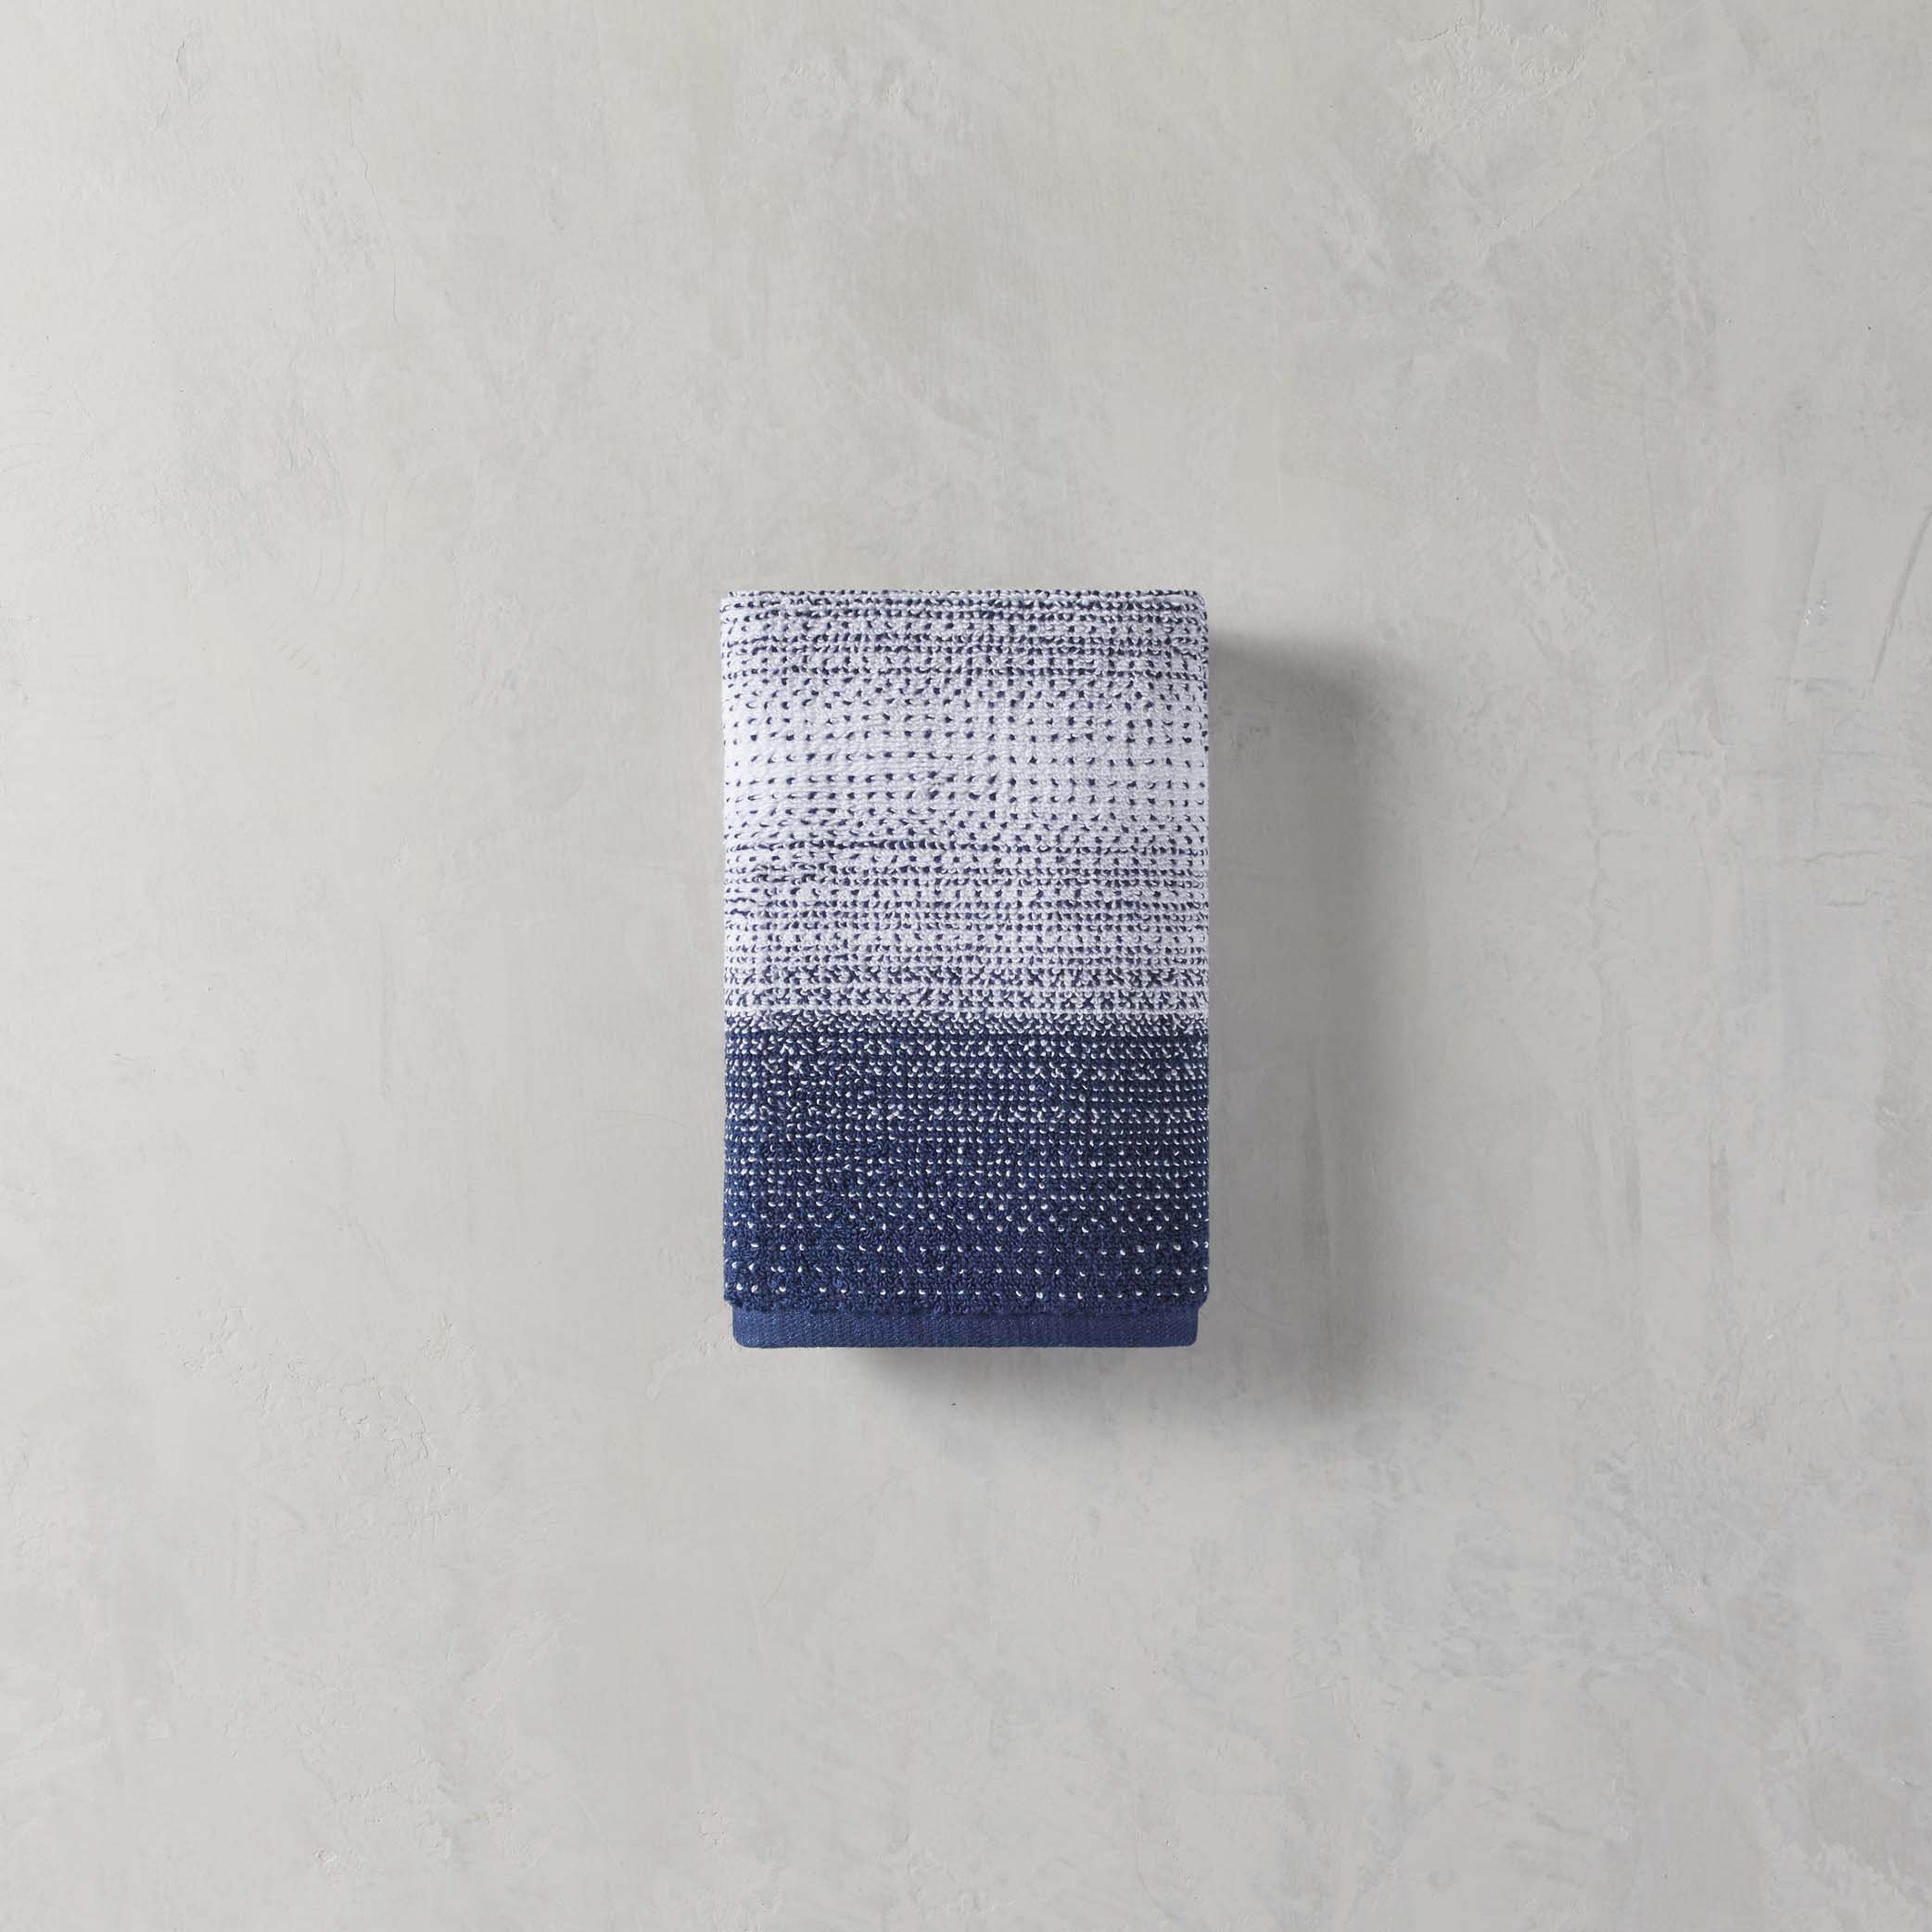 Better Homes & Gardens Signature Soft Heathered Hand Towel, Blue - image 1 of 5